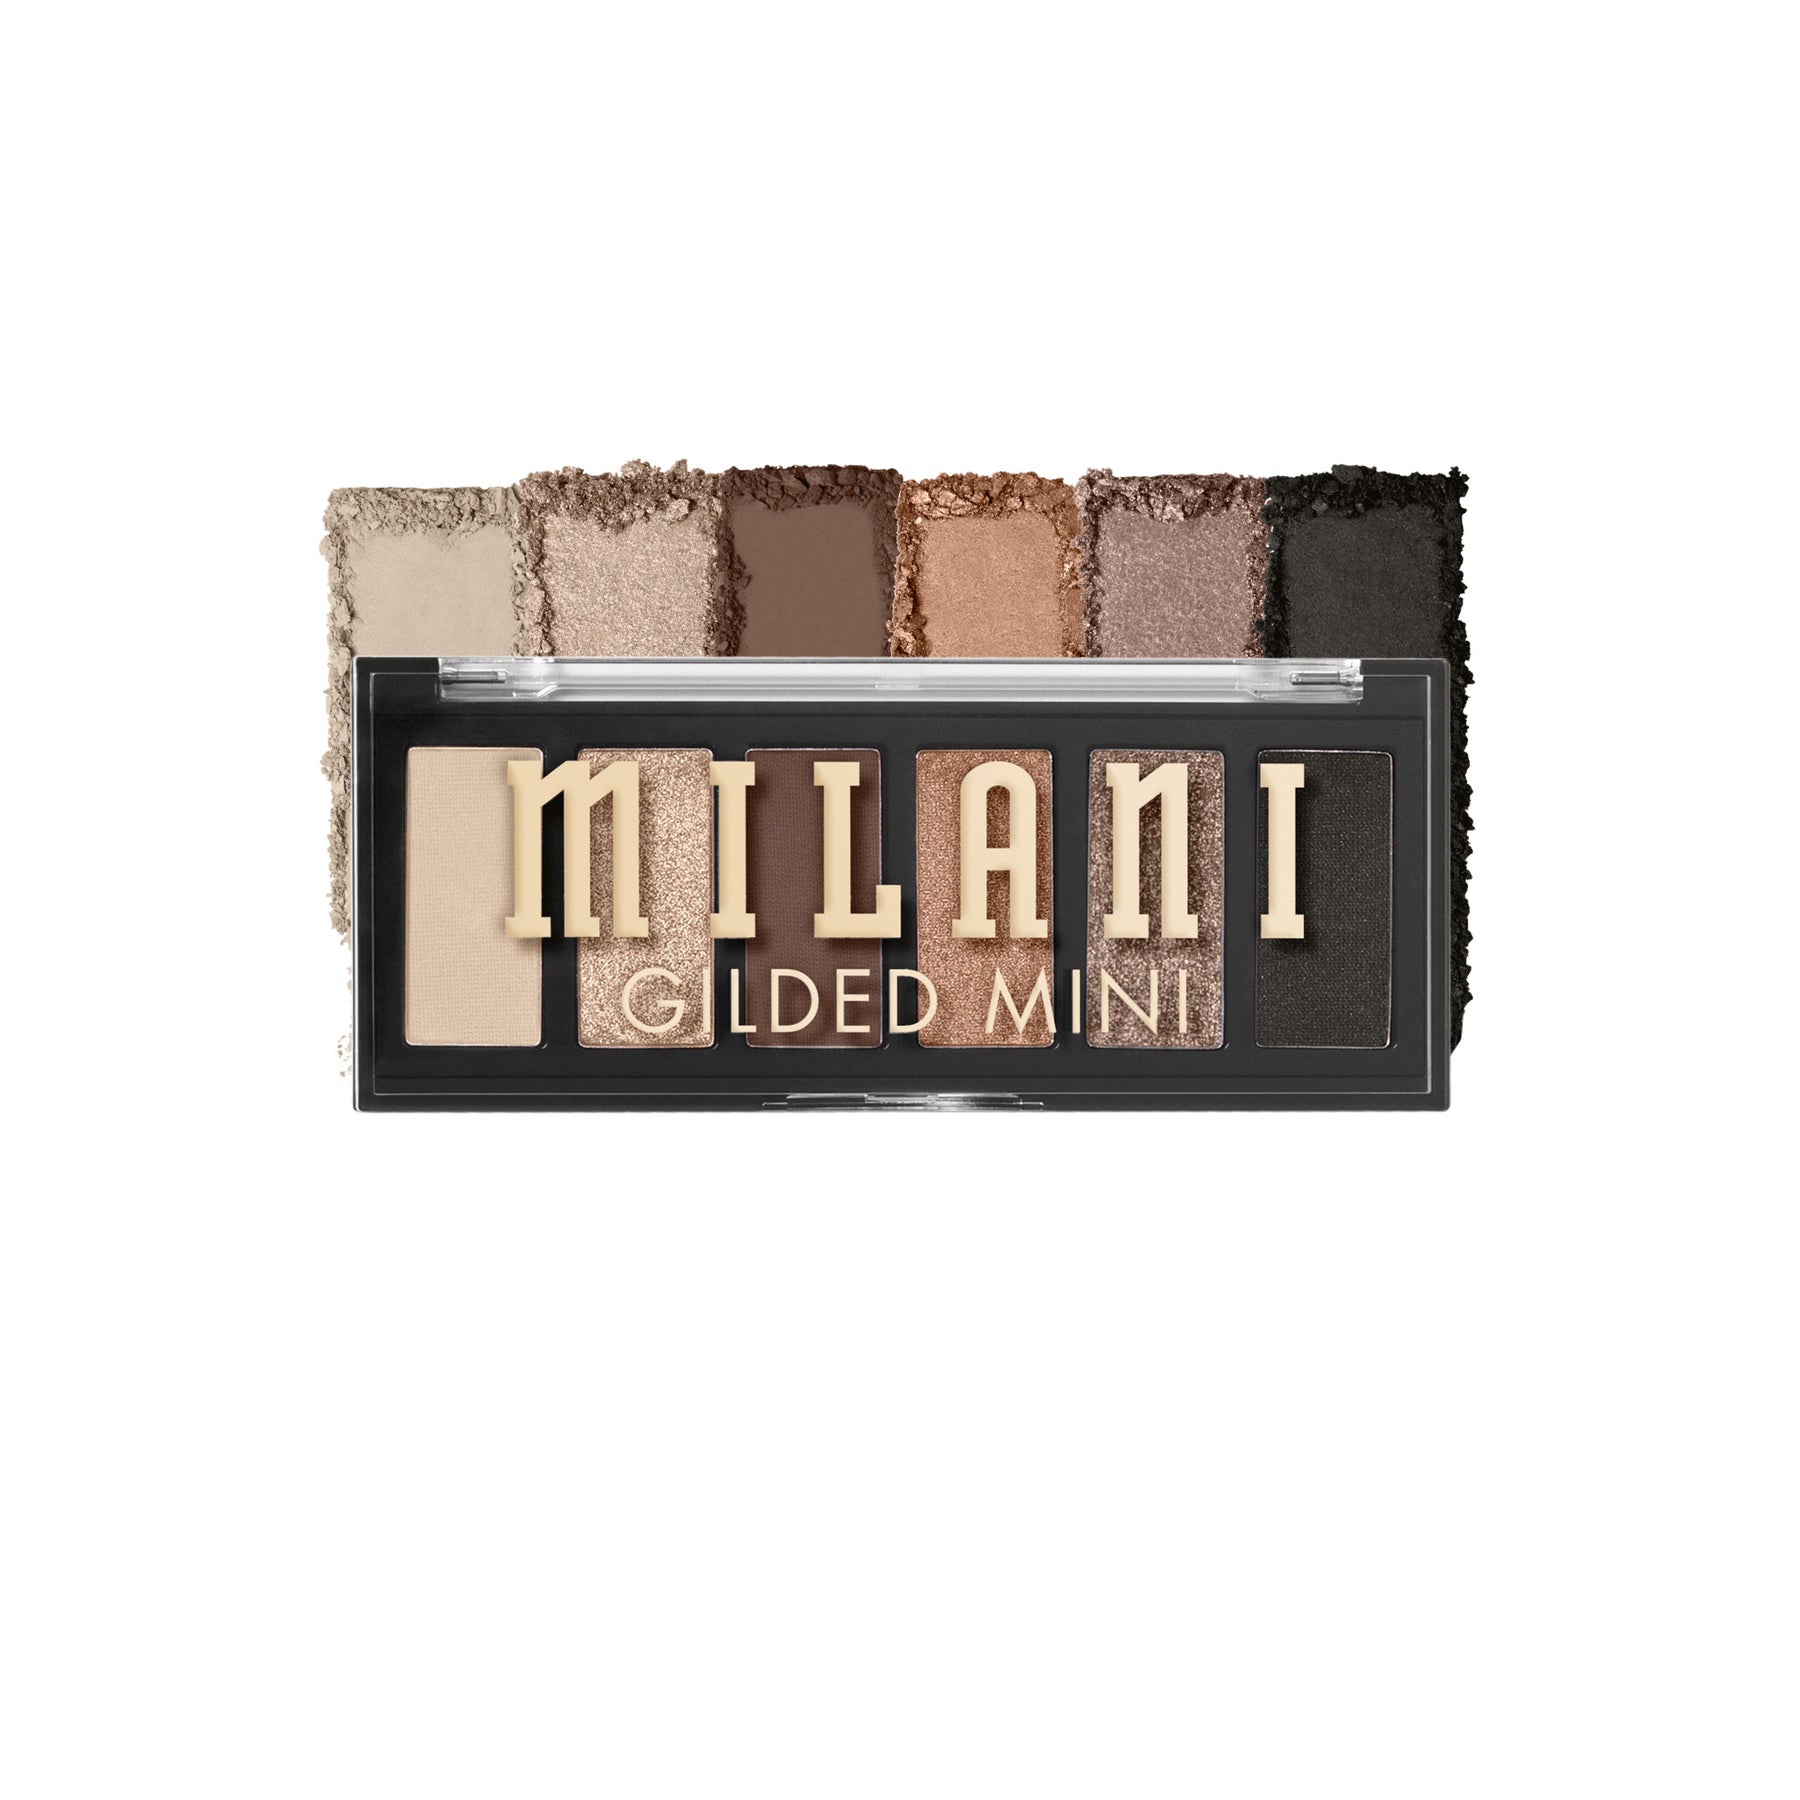 SOMBRAS GILDED MINI EYESHADOW QUADS CALL ME OLD-FASHIONED - MILANI